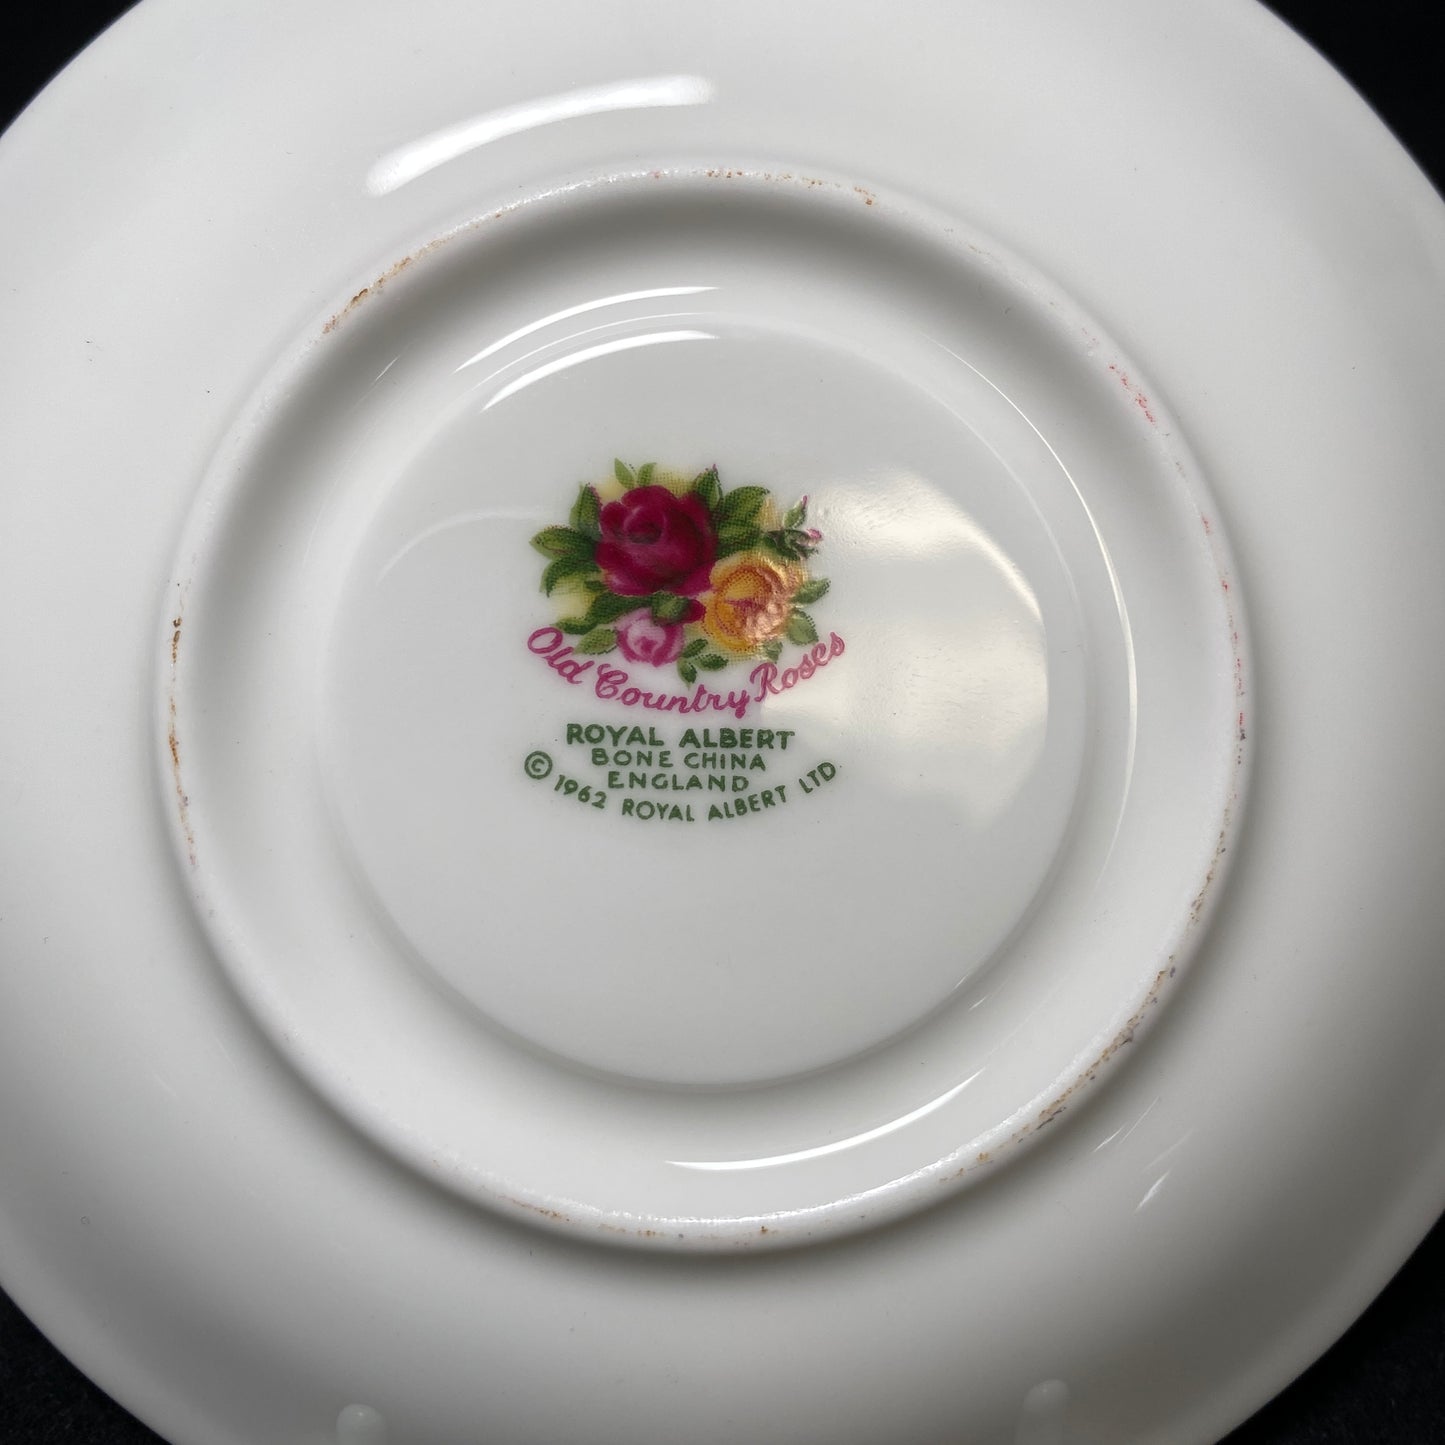 Royal Albert Old Country Roses Tea Cup & Saucer